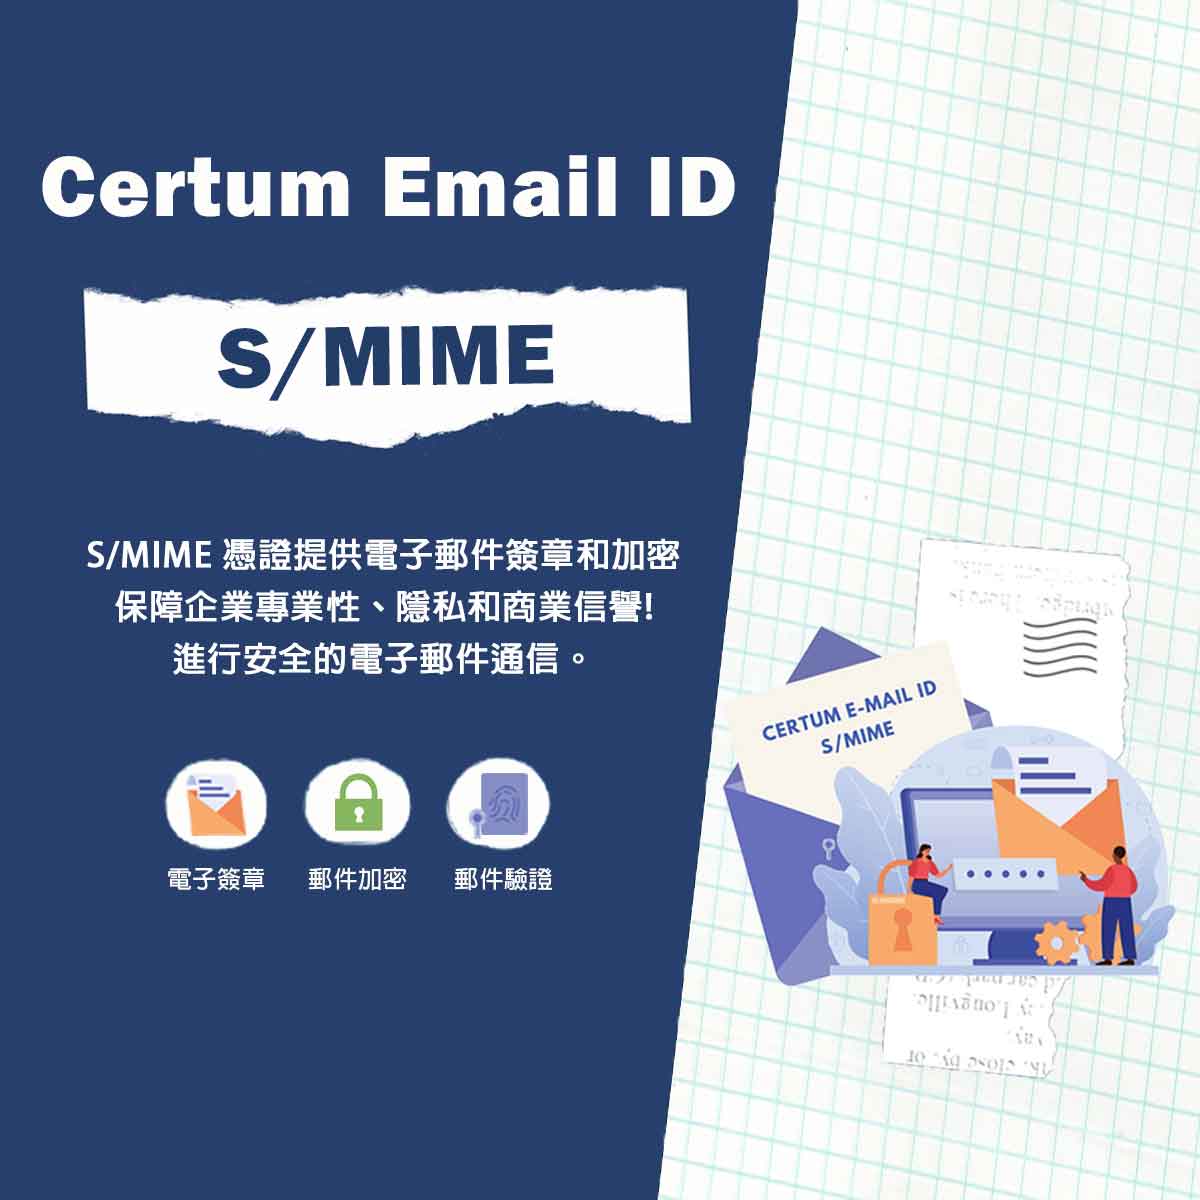 S/MIME-憑證即為 Certum Email ID Certificate